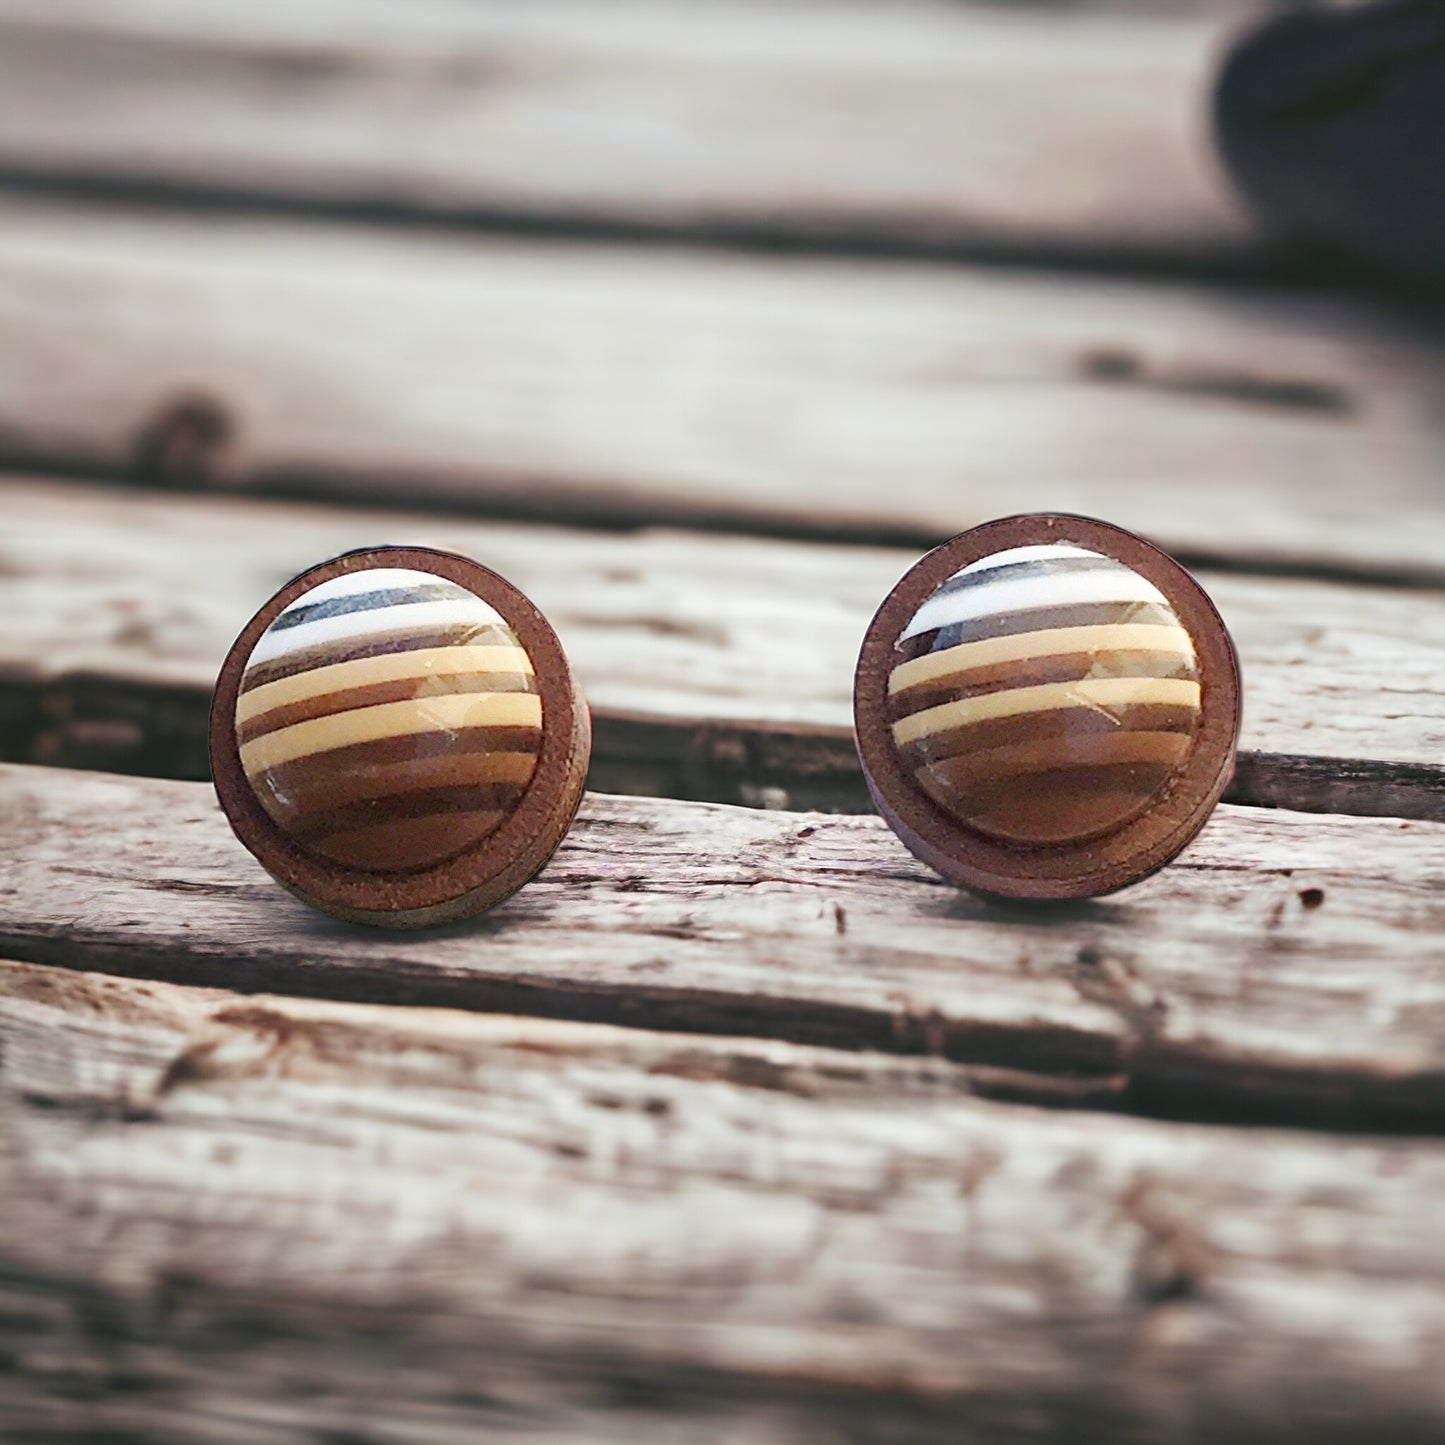 Brown Striped Earrings - Neutral Minimalist Studs with Natural Wood Design | Boho Chic Statement Jewelry